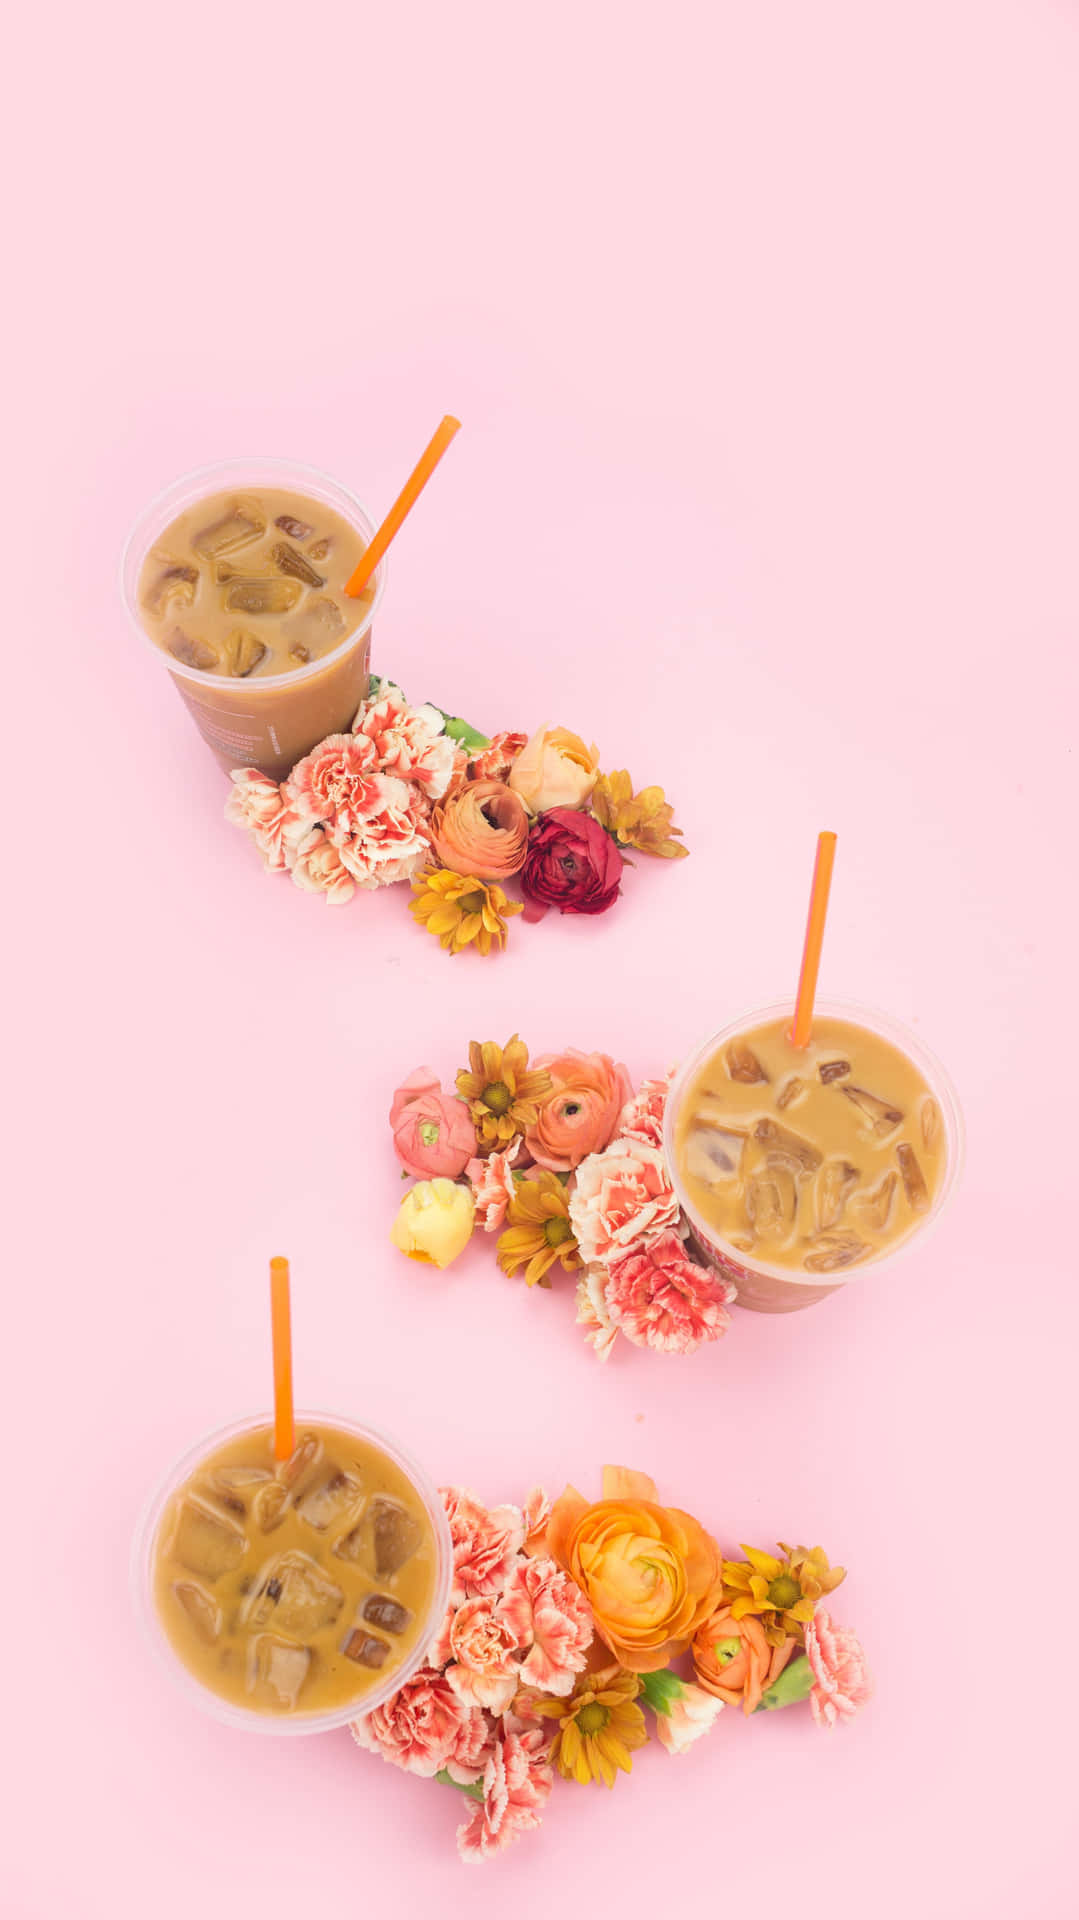 Three Cups Of Coffee With Flowers On A Pink Background